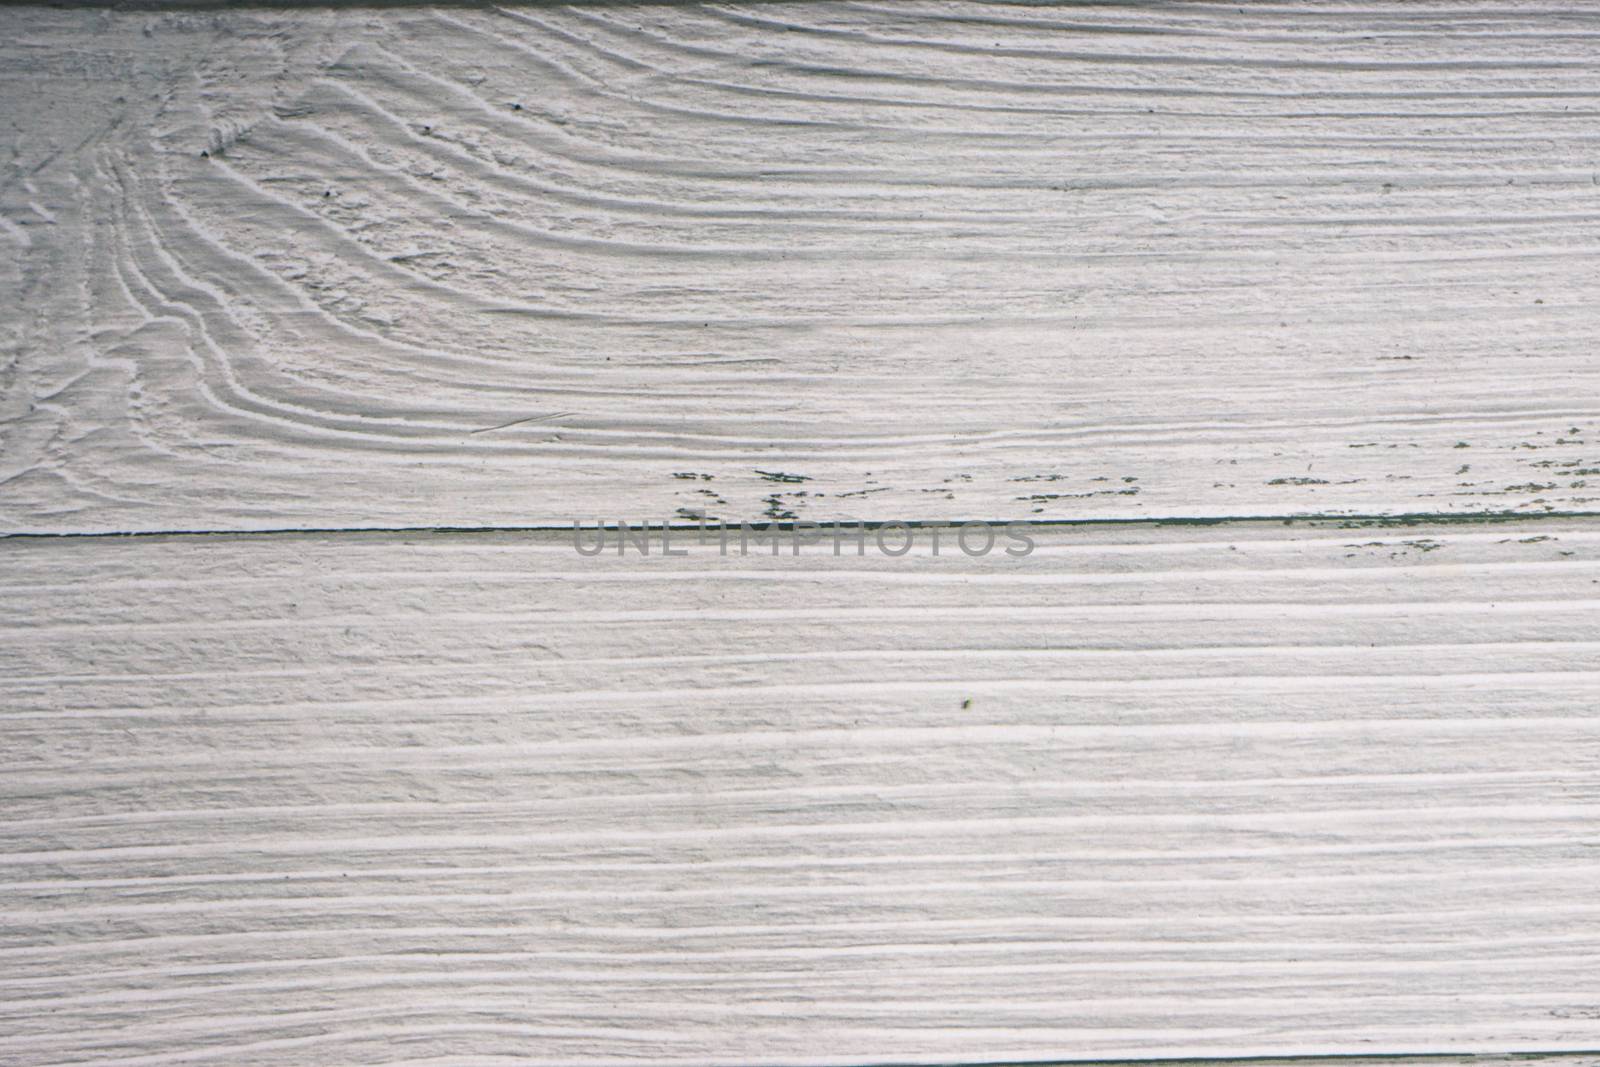 Wooden background and pattern closeup. 